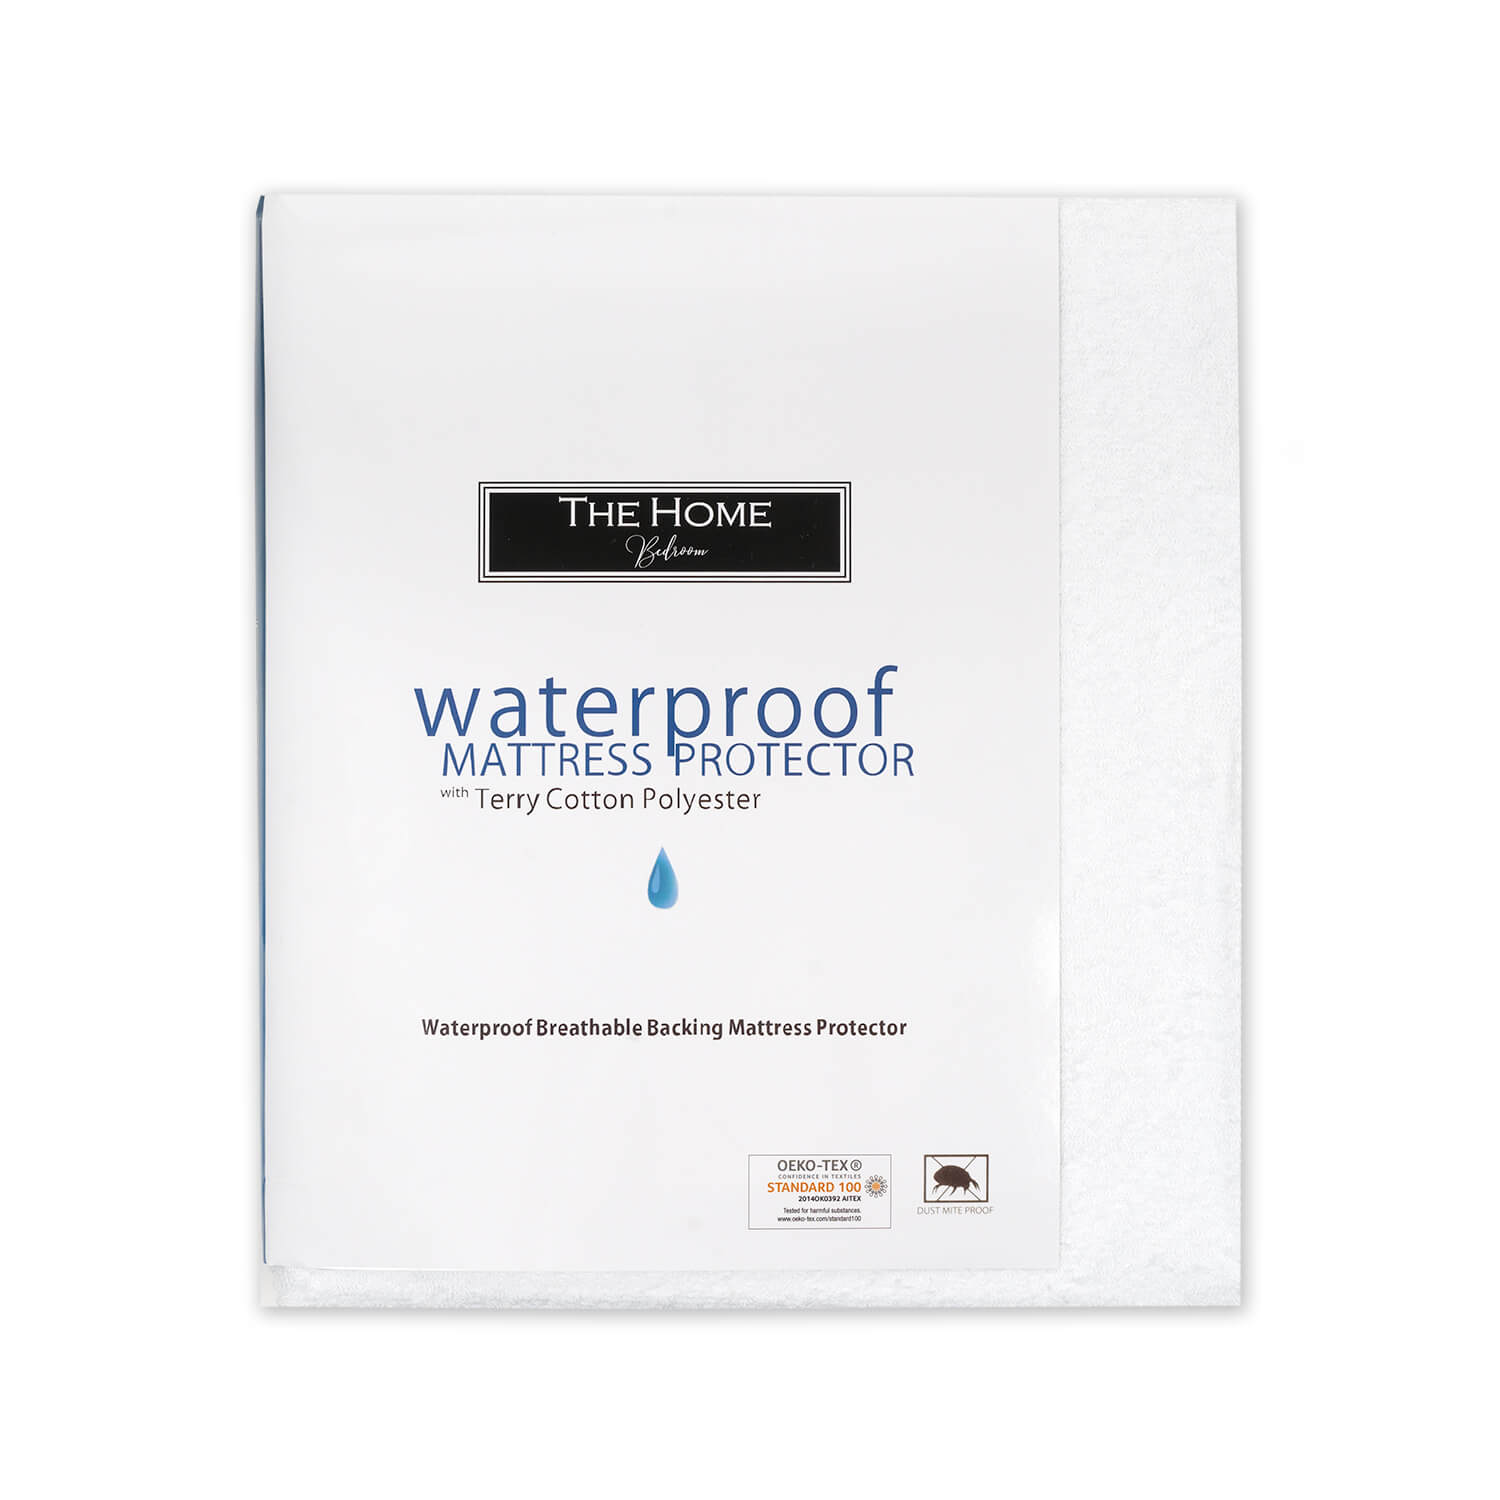 The Home Bedroom Terry Waterproof Mattress Protector 1 Shaws Department Stores